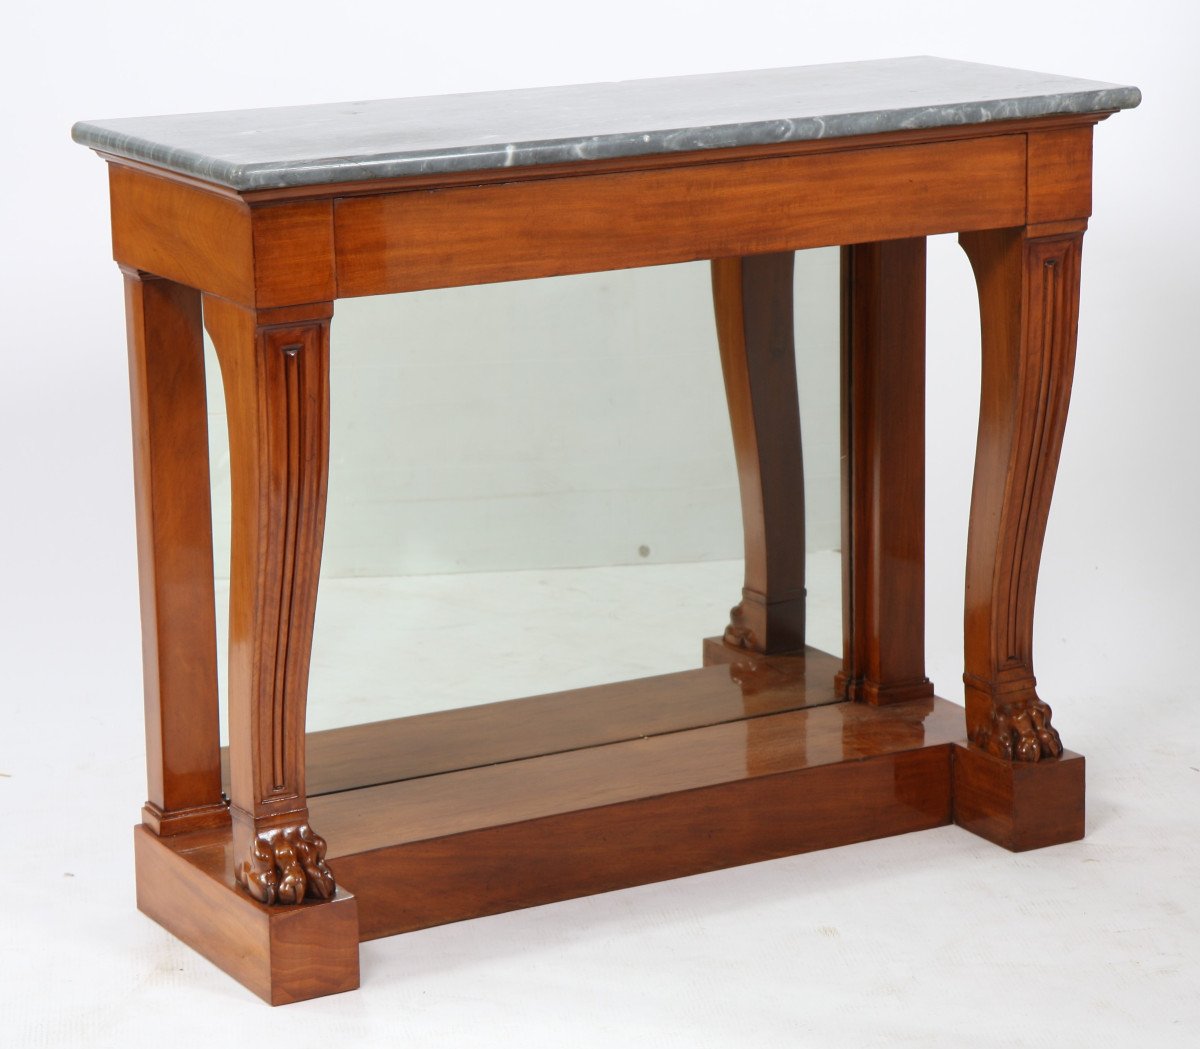 Jacob Stamped Console